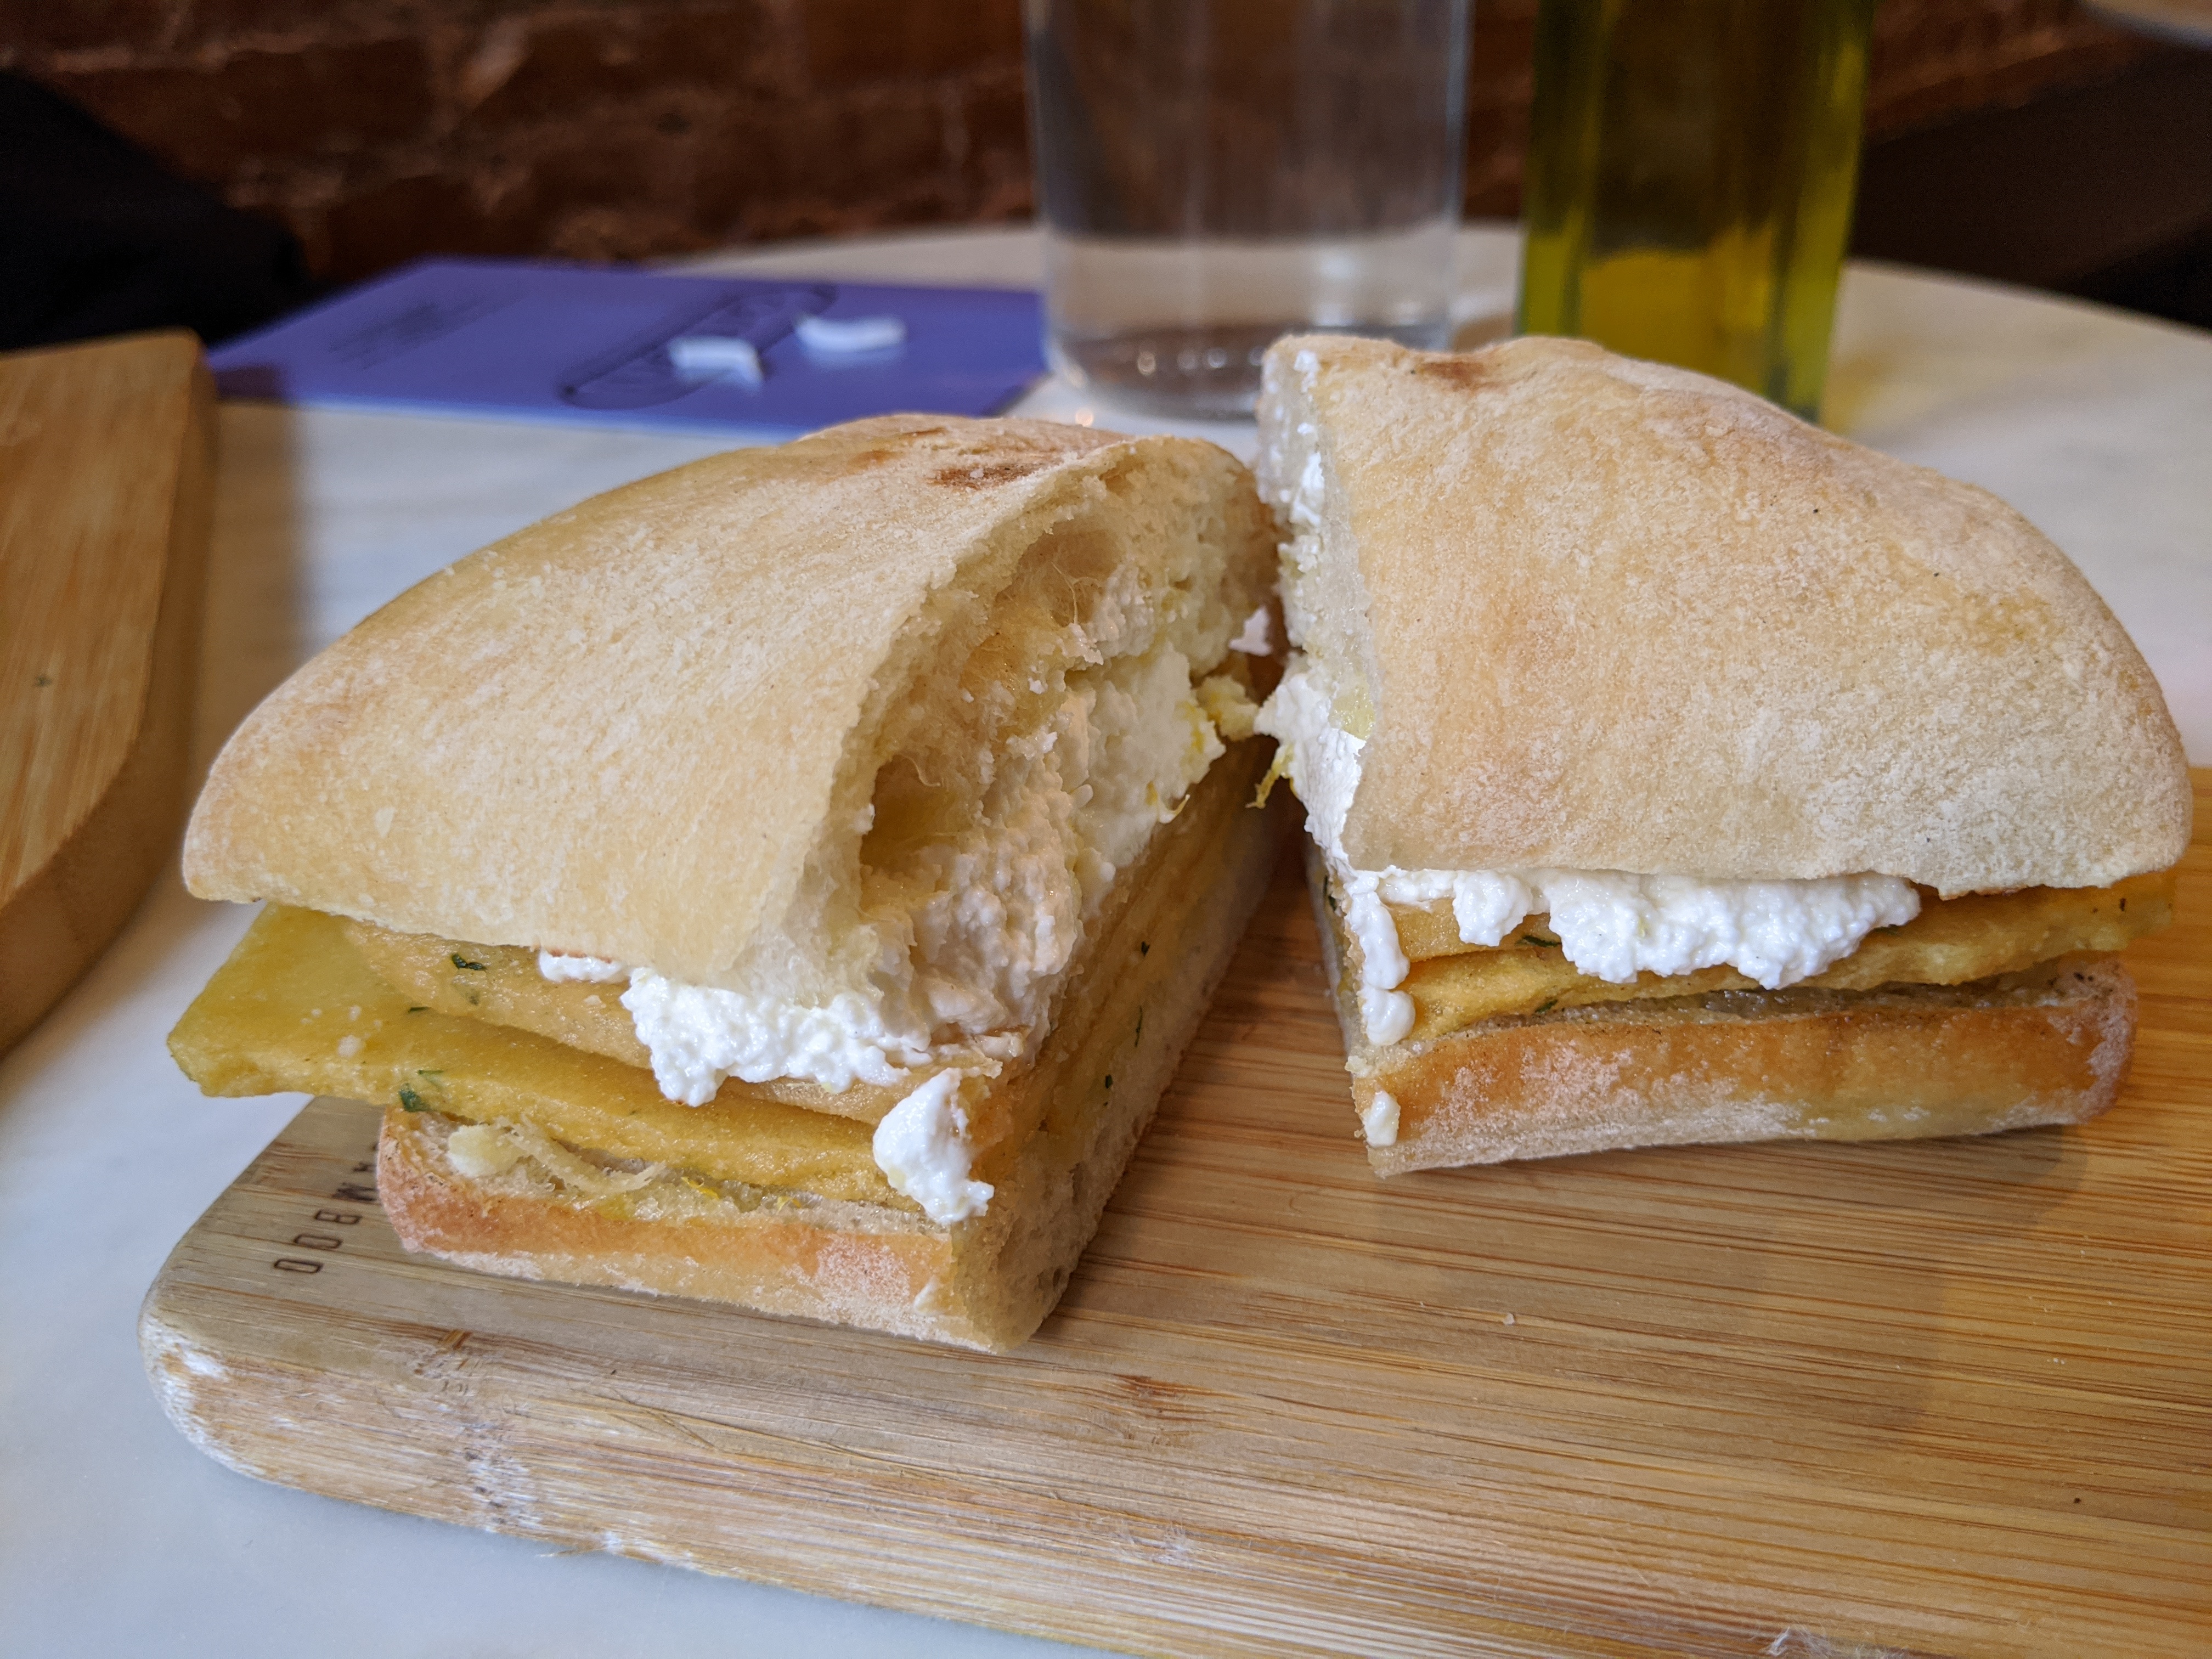 A sandwich of yellow slabs of fried chickpea paste and ricotta cheese.